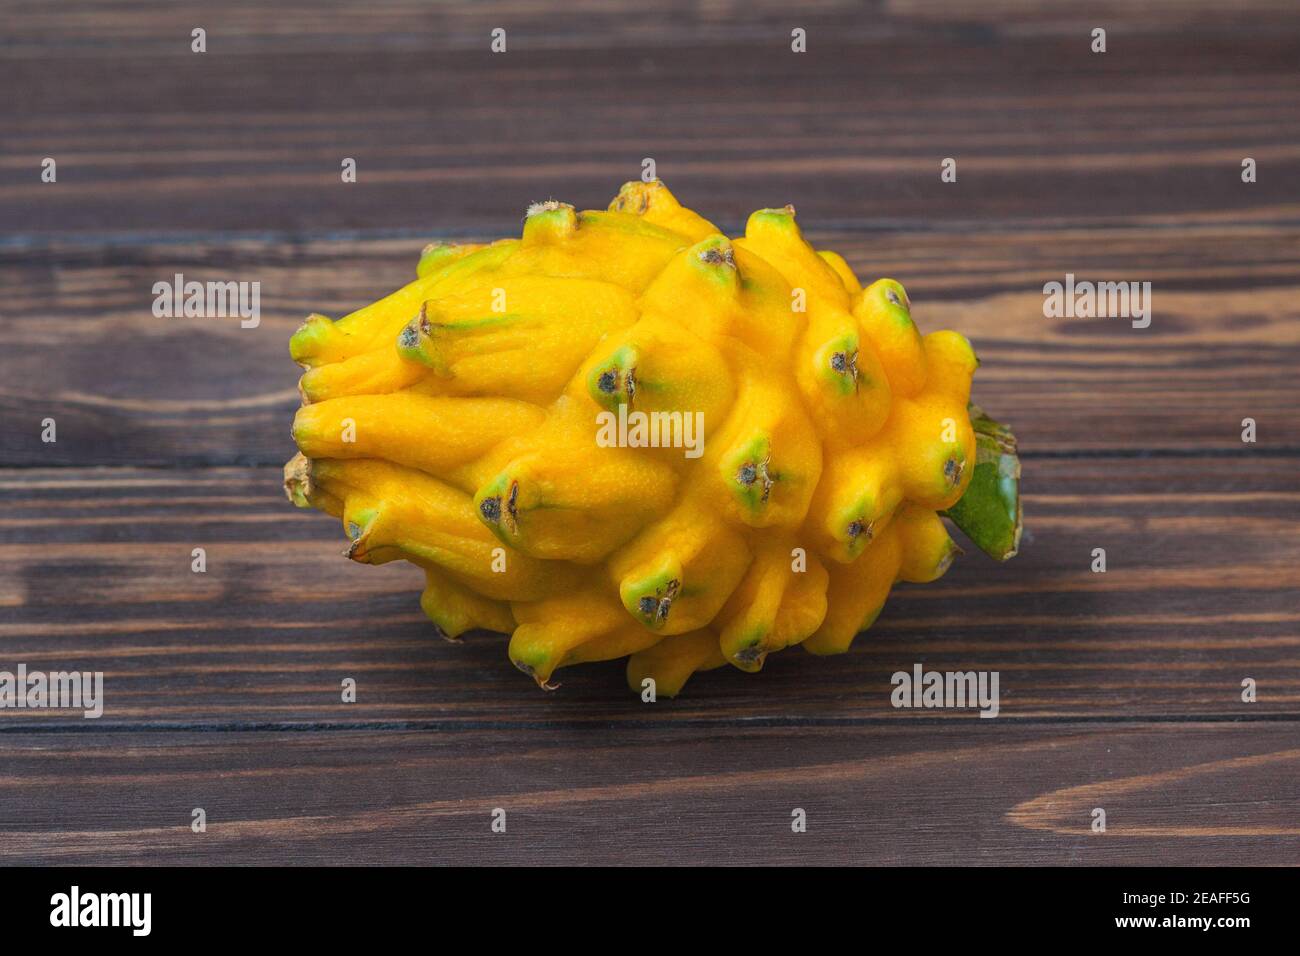 Ripe yellow pitahaya fruit, lie on a background of wooden boards. High quality photo Stock Photo